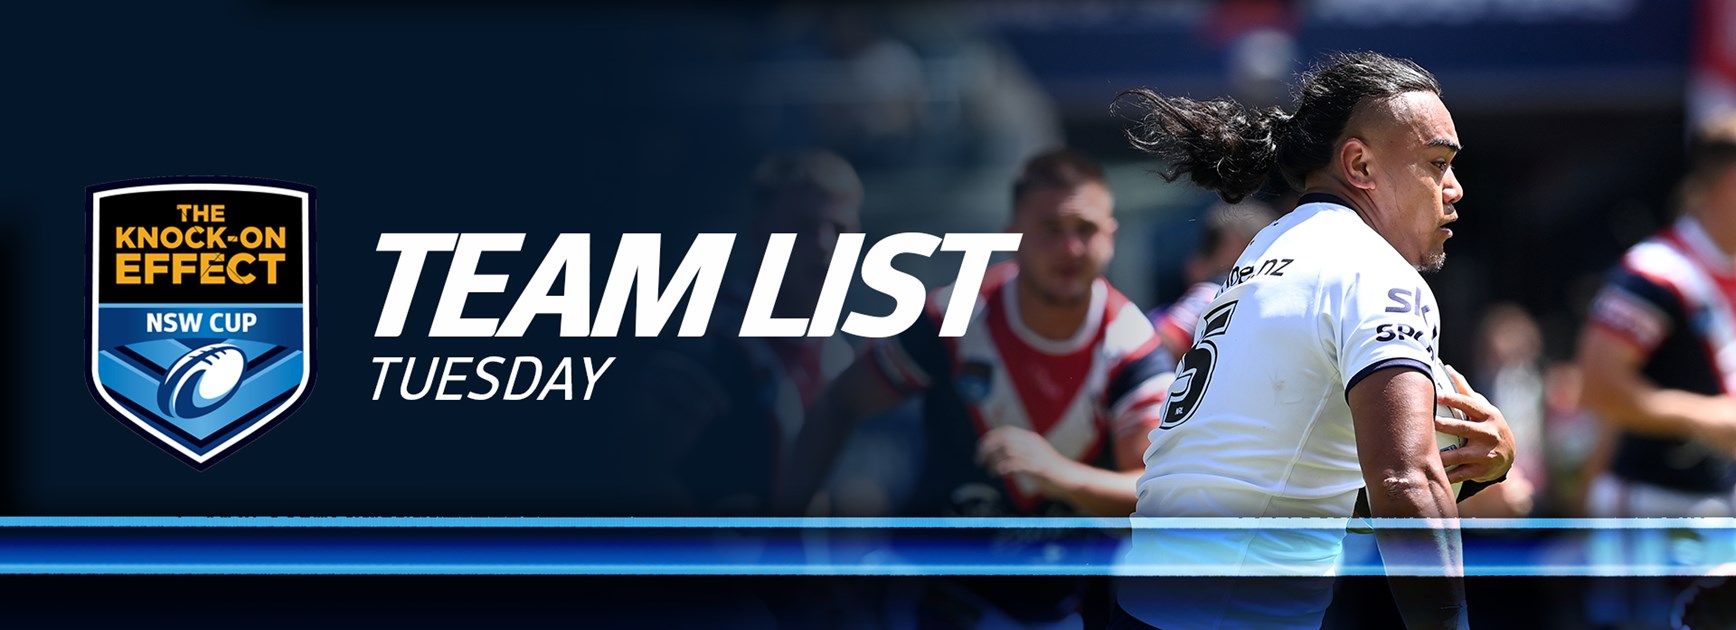 Team List Tuesday | The Knock-On Effect NSW Cup - Round Four